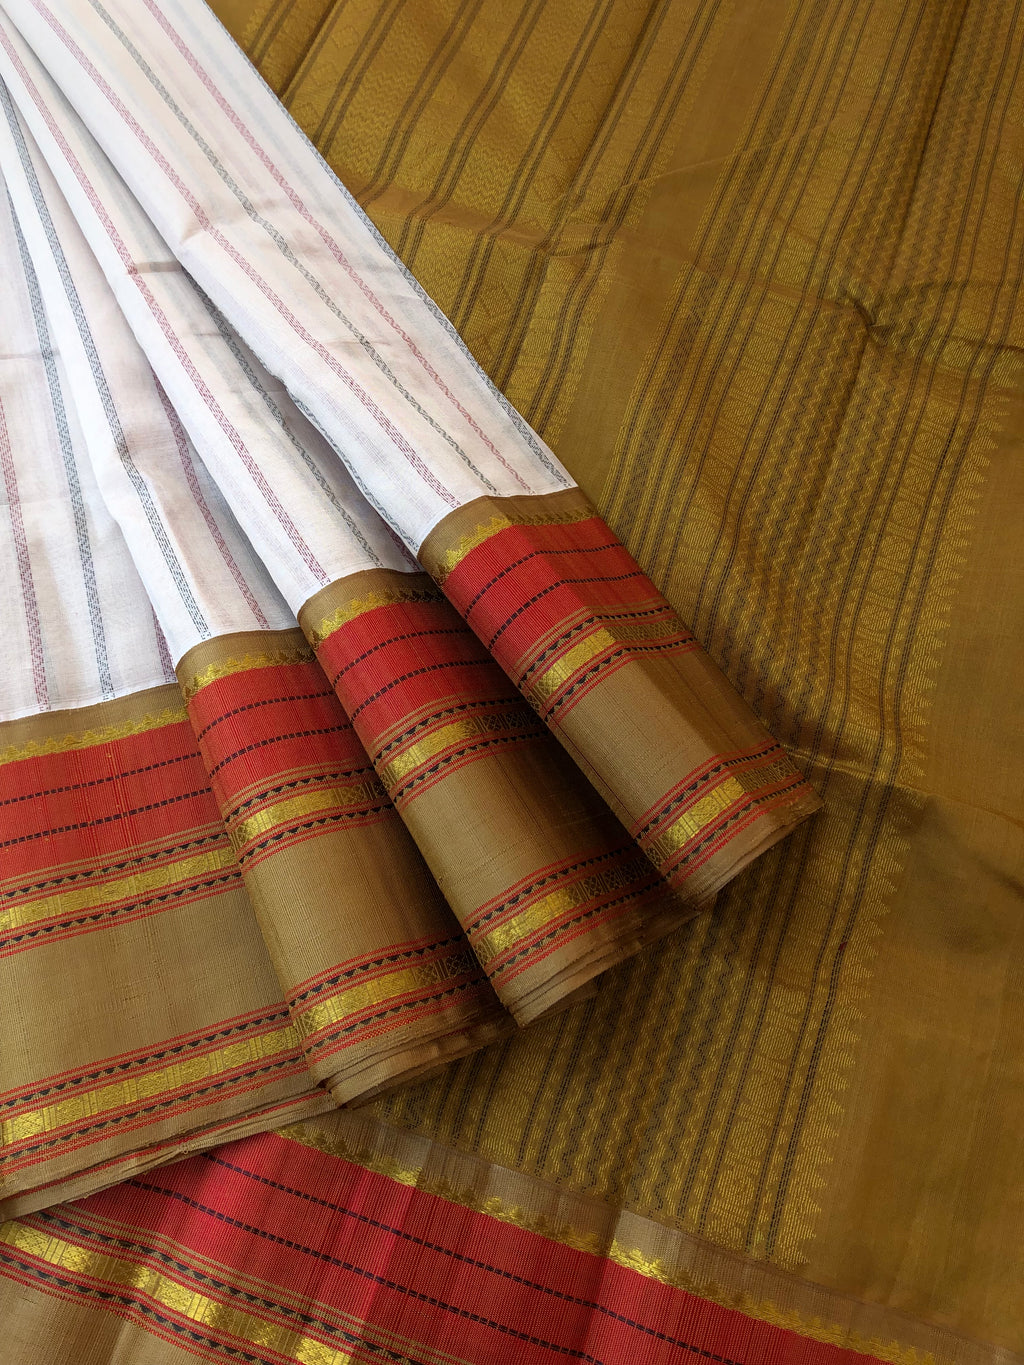 Divyam - Korvai Silk Cotton with Pure Silk Woven Borders - off white and beige vertical veldhari